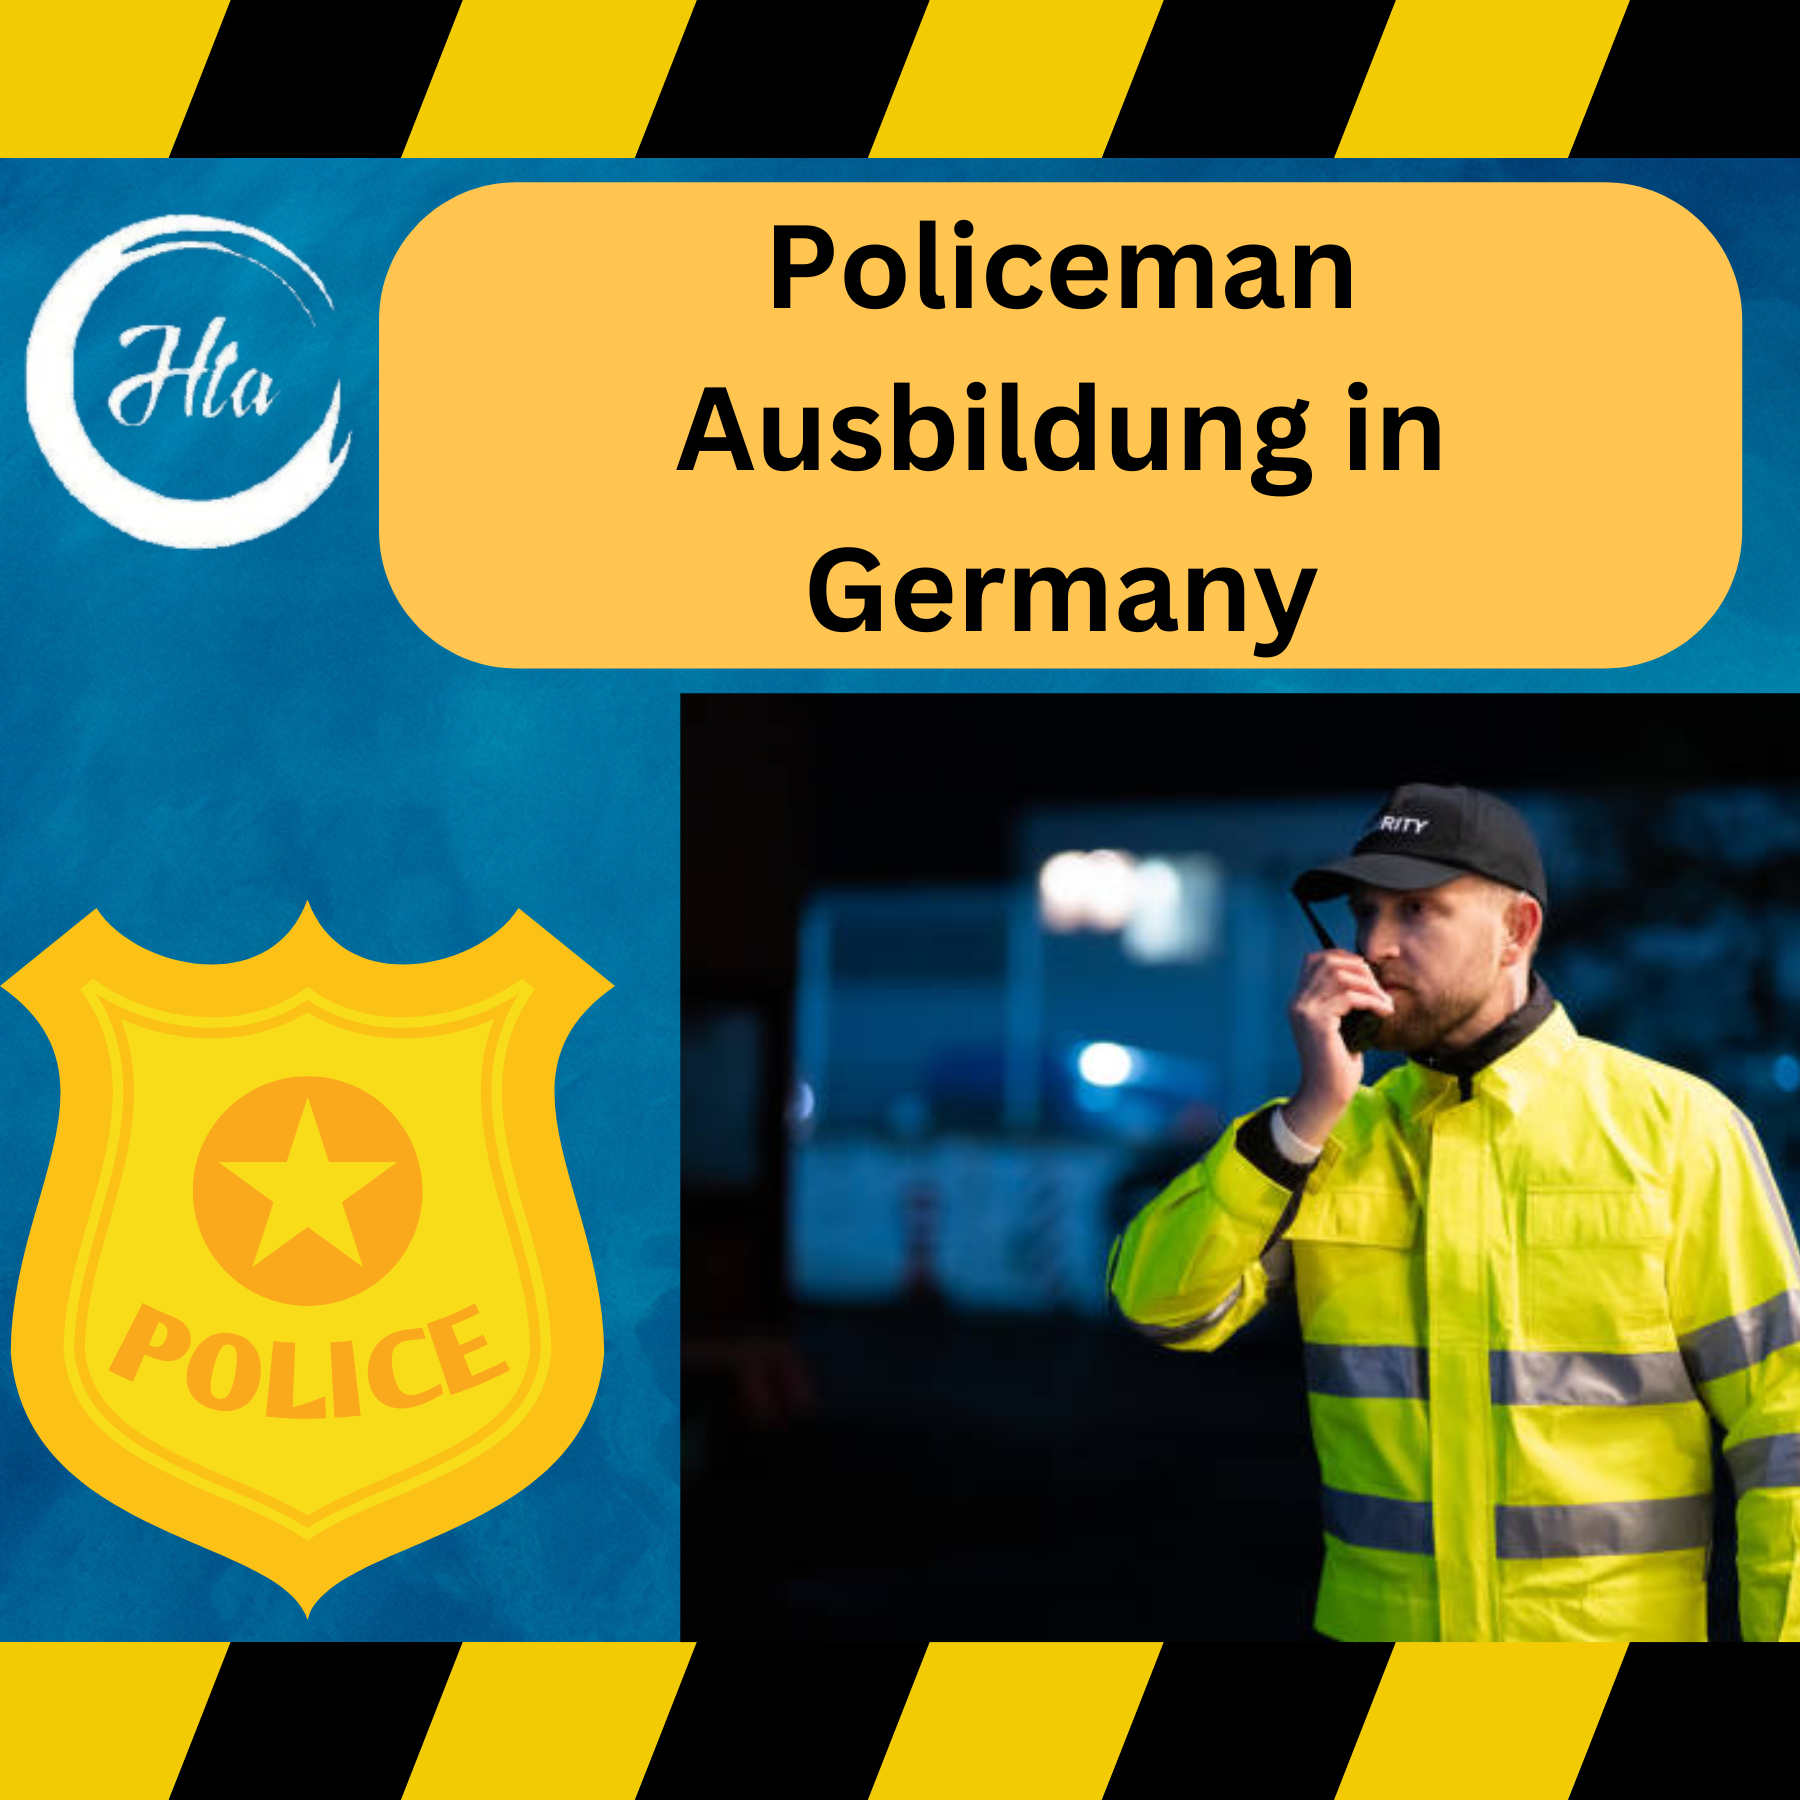 policeman-ausbildung-in-germany-everything-you-need-to-know-how-to